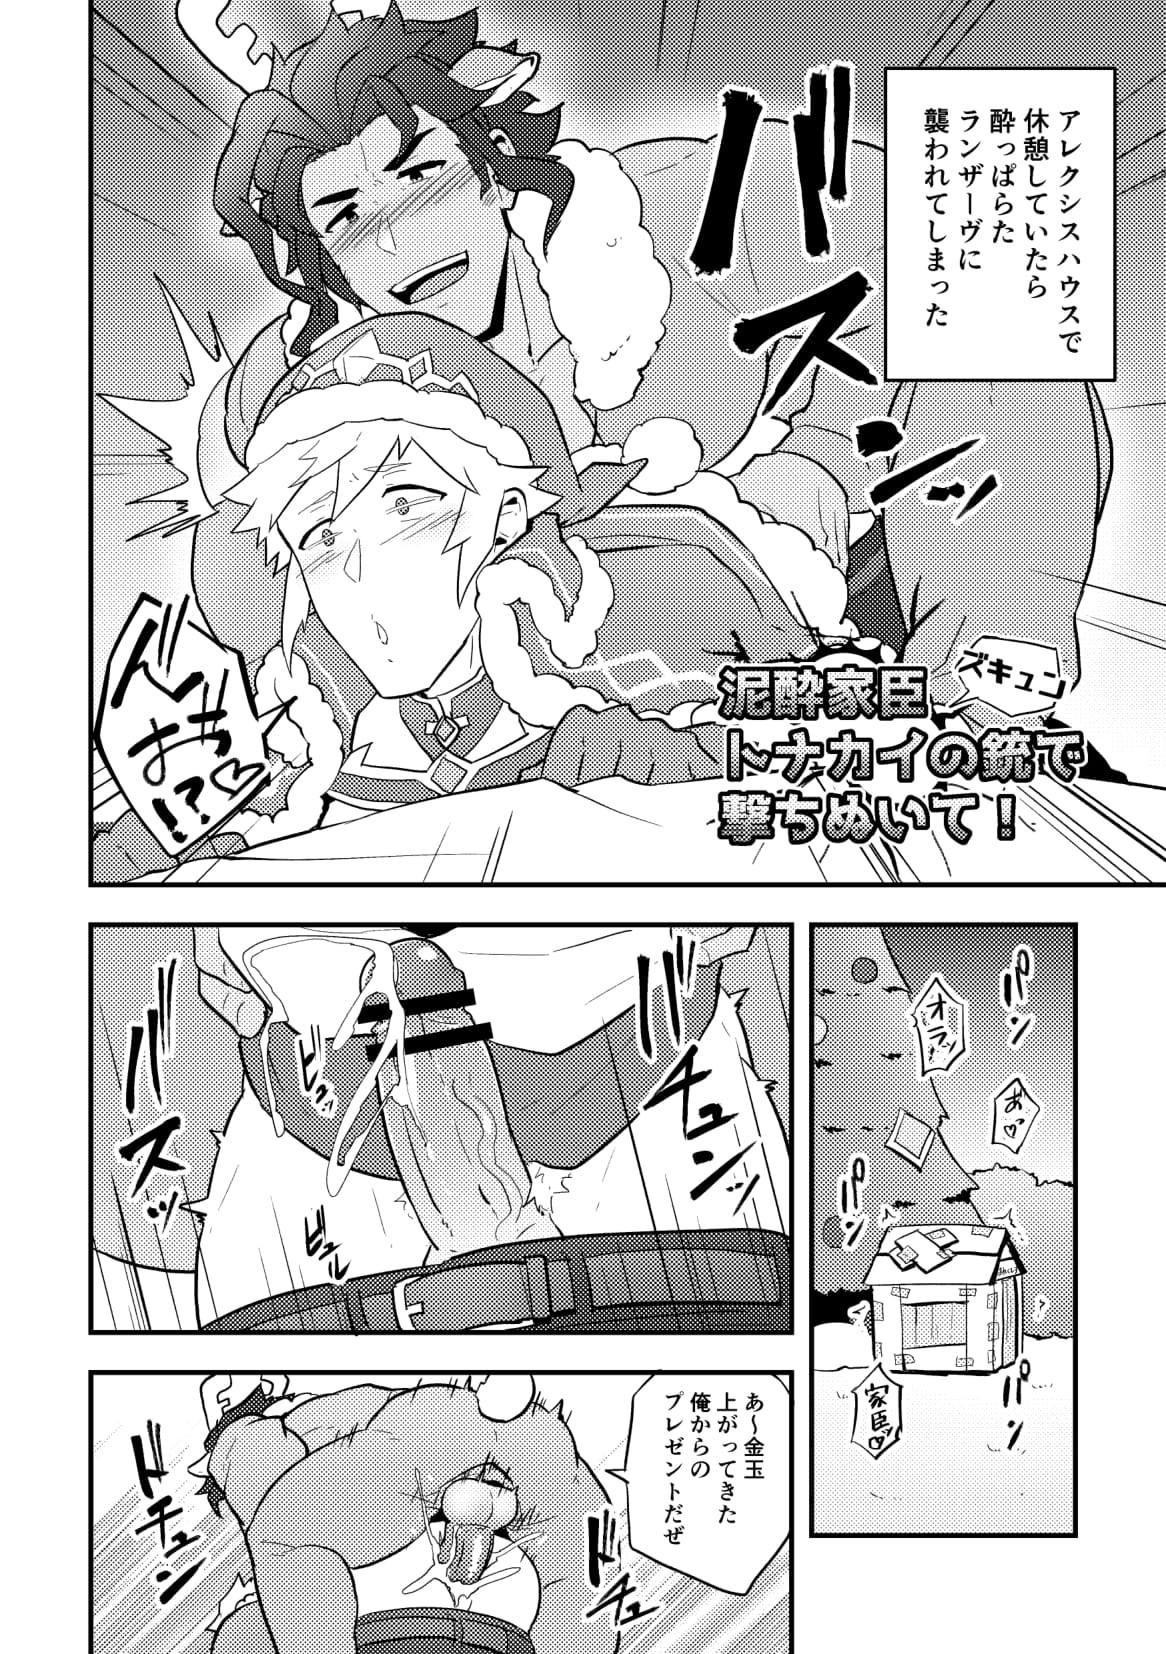 Spanking Onabe Hon C95 - The idolmaster Fate grand order Granblue fantasy Pokemon Fire emblem Castlevania Dragalia lost Punch-out Siririca - Page 6